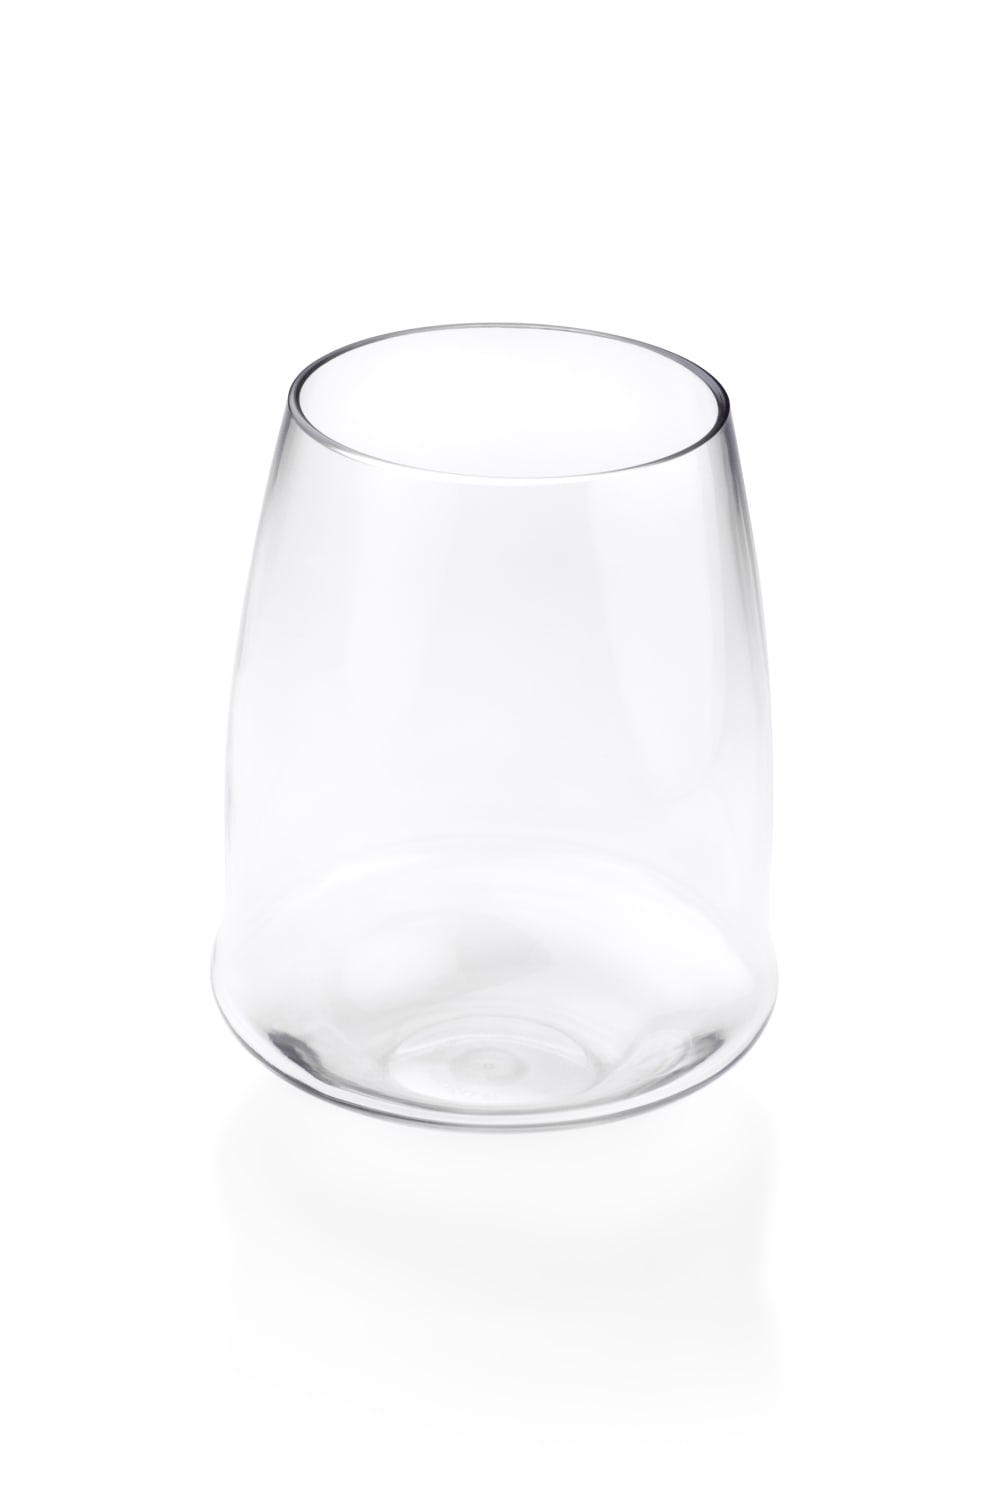 Gsi Outdoors Wine Glass, Stemless